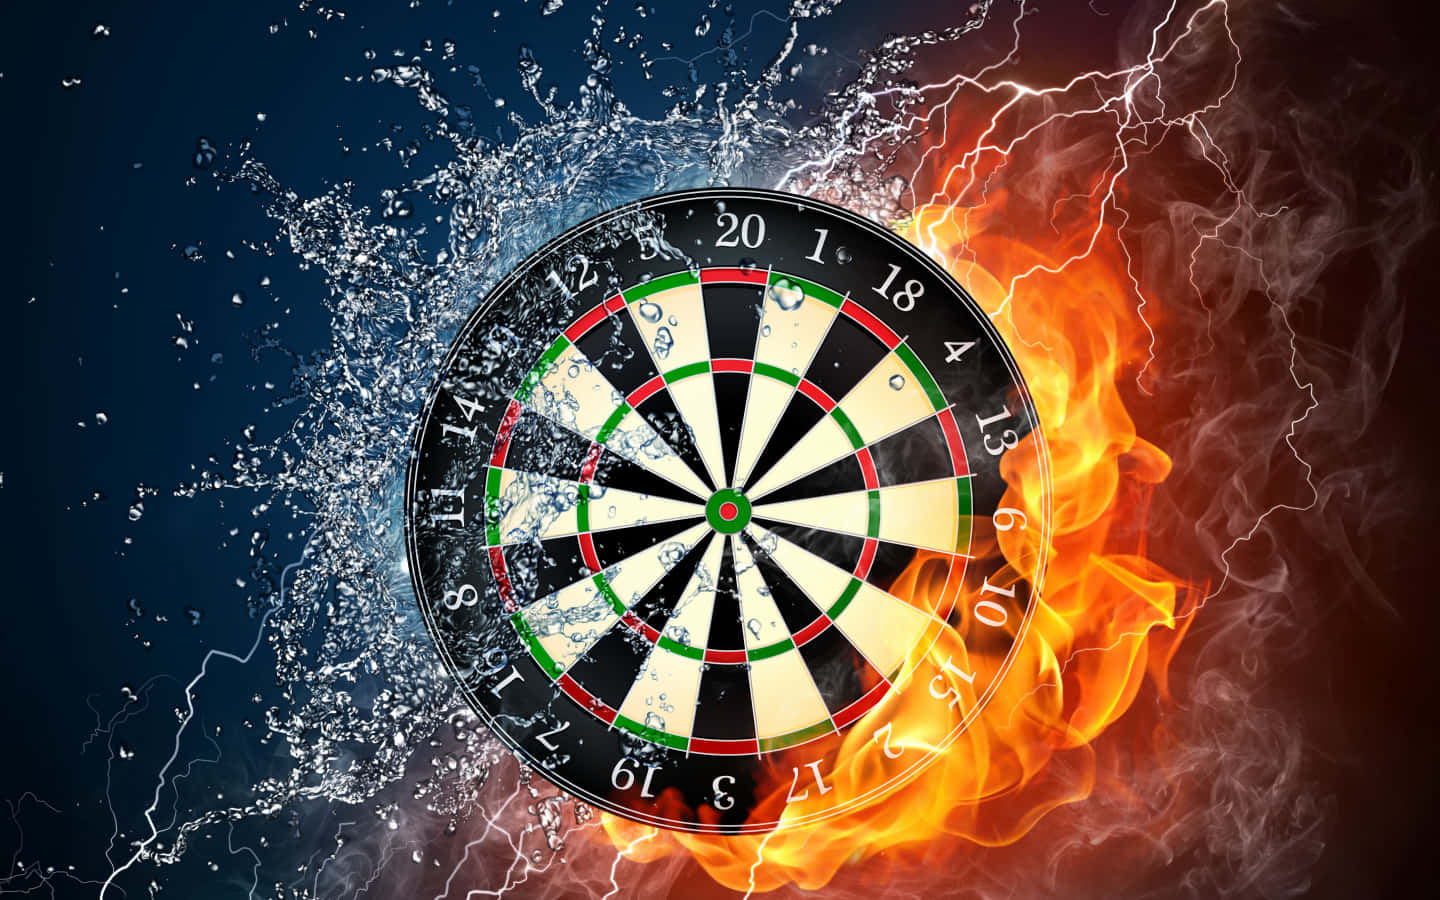 Darts - A Dart Board With Flames And Water